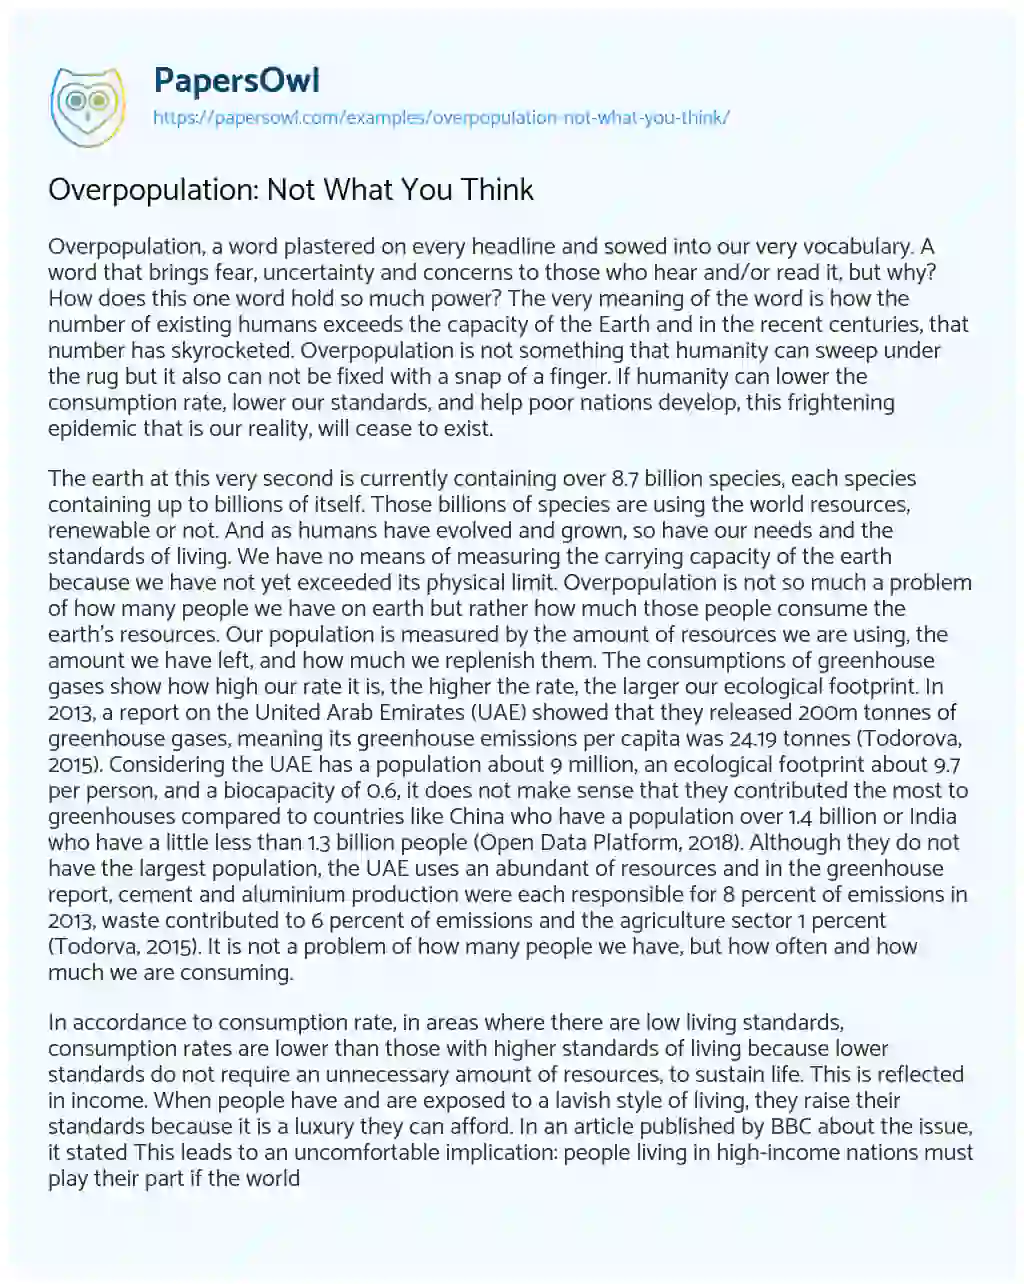 Overpopulation: not what you Think essay